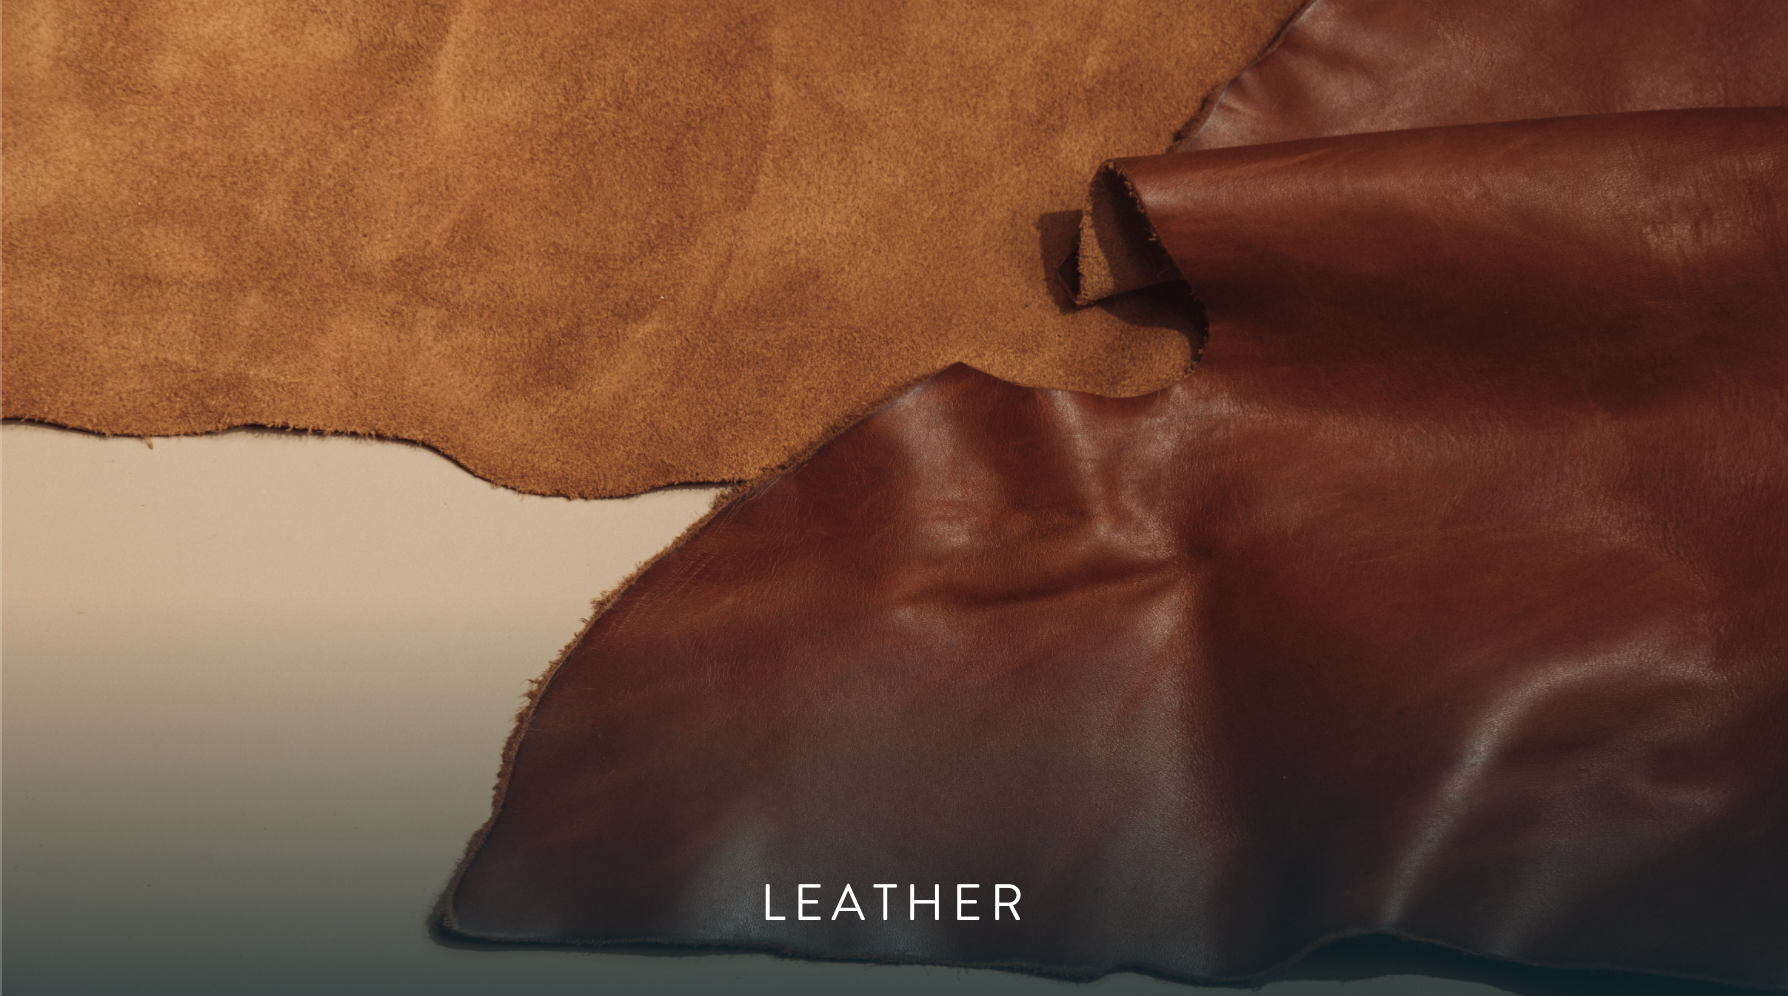 Load video: Perfectly imperfect - leather